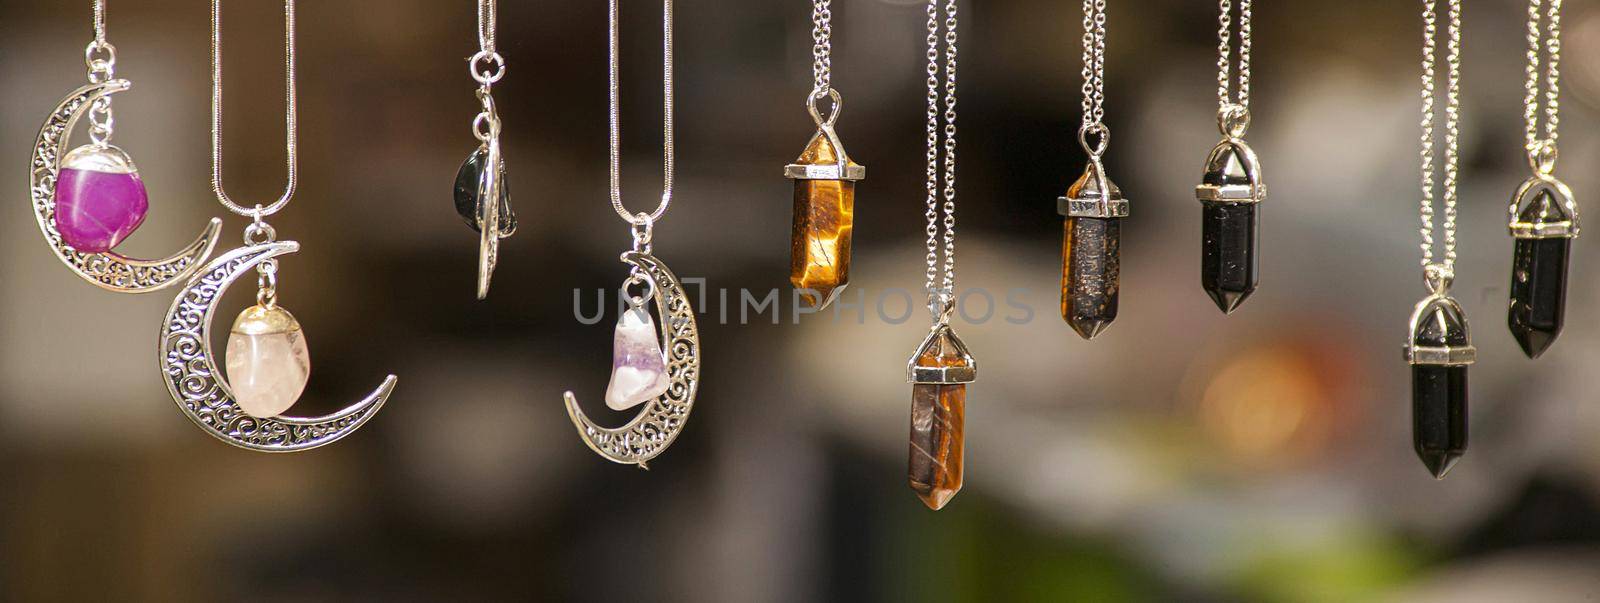 Miscellaneous silver necklaces of various shapes and colors set with colored stones on blurred background, banner image with copy space